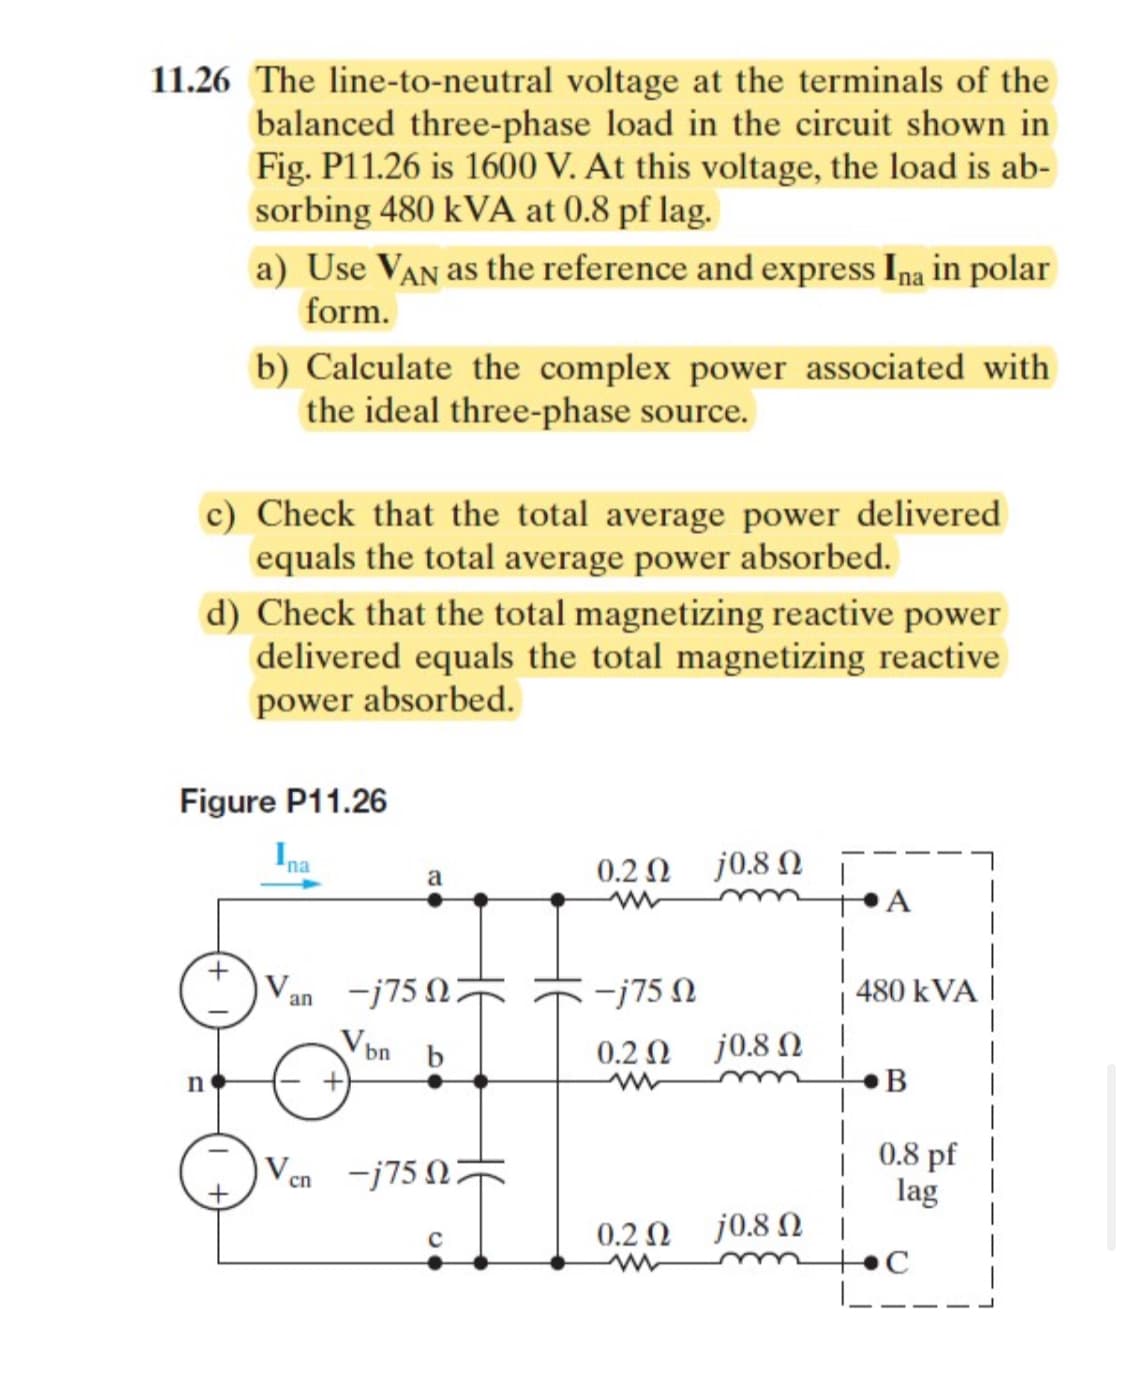 11.26 The line-to-neutral voltage at the terminals of the
balanced three-phase load in the circuit shown in
Fig. P11.26 is 1600 V. At this voltage, the load is ab-
sorbing 480 kVA at 0.8 pf lag.
a) Use VAN as the reference and express Ina in polar
form.
n
b) Calculate the complex power associated with
the ideal three-phase source.
c) Check that the total average power delivered
equals the total average power absorbed.
d) Check that the total magnetizing reactive power
delivered equals the total magnetizing reactive
power absorbed.
Figure P11.26
Ina
Van
V
cn
a
-1750
bn
b
-j75 Ω ;
J
0.2 Ω j0.8 Ω
-j750
0.2 Ω - j 0.8 Ω
ww
0.2 Ω j08 Ω |
ww
A
480 kVA
B
0.8 pf
lag